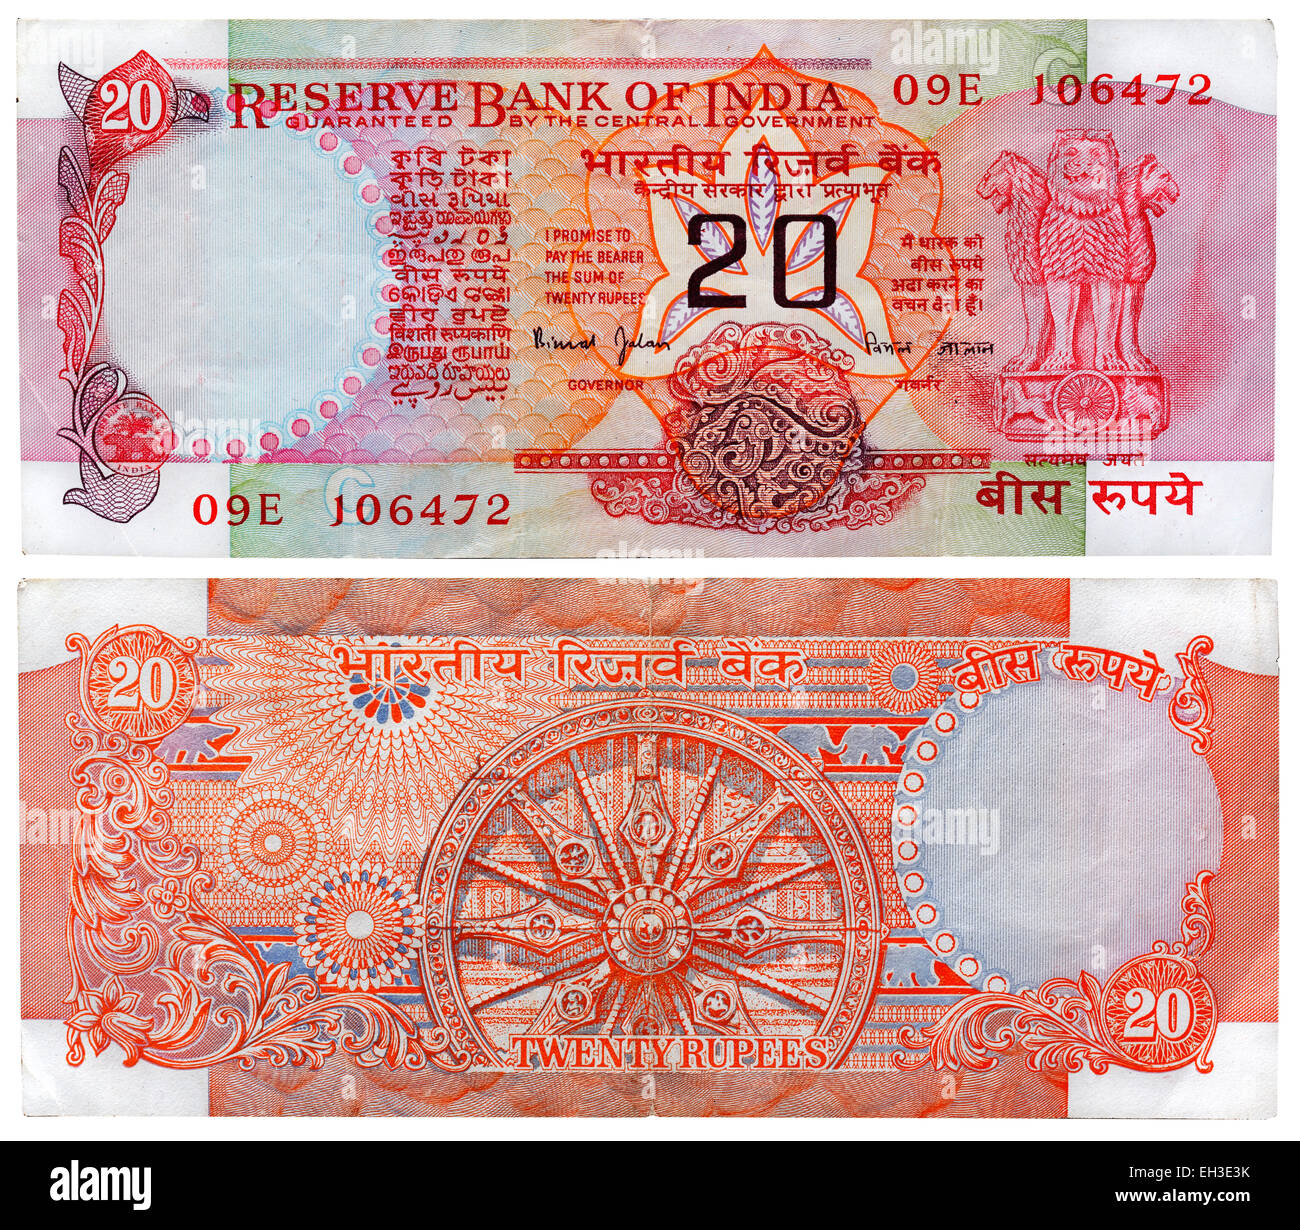 20 rupees banknote, India Stock Photo